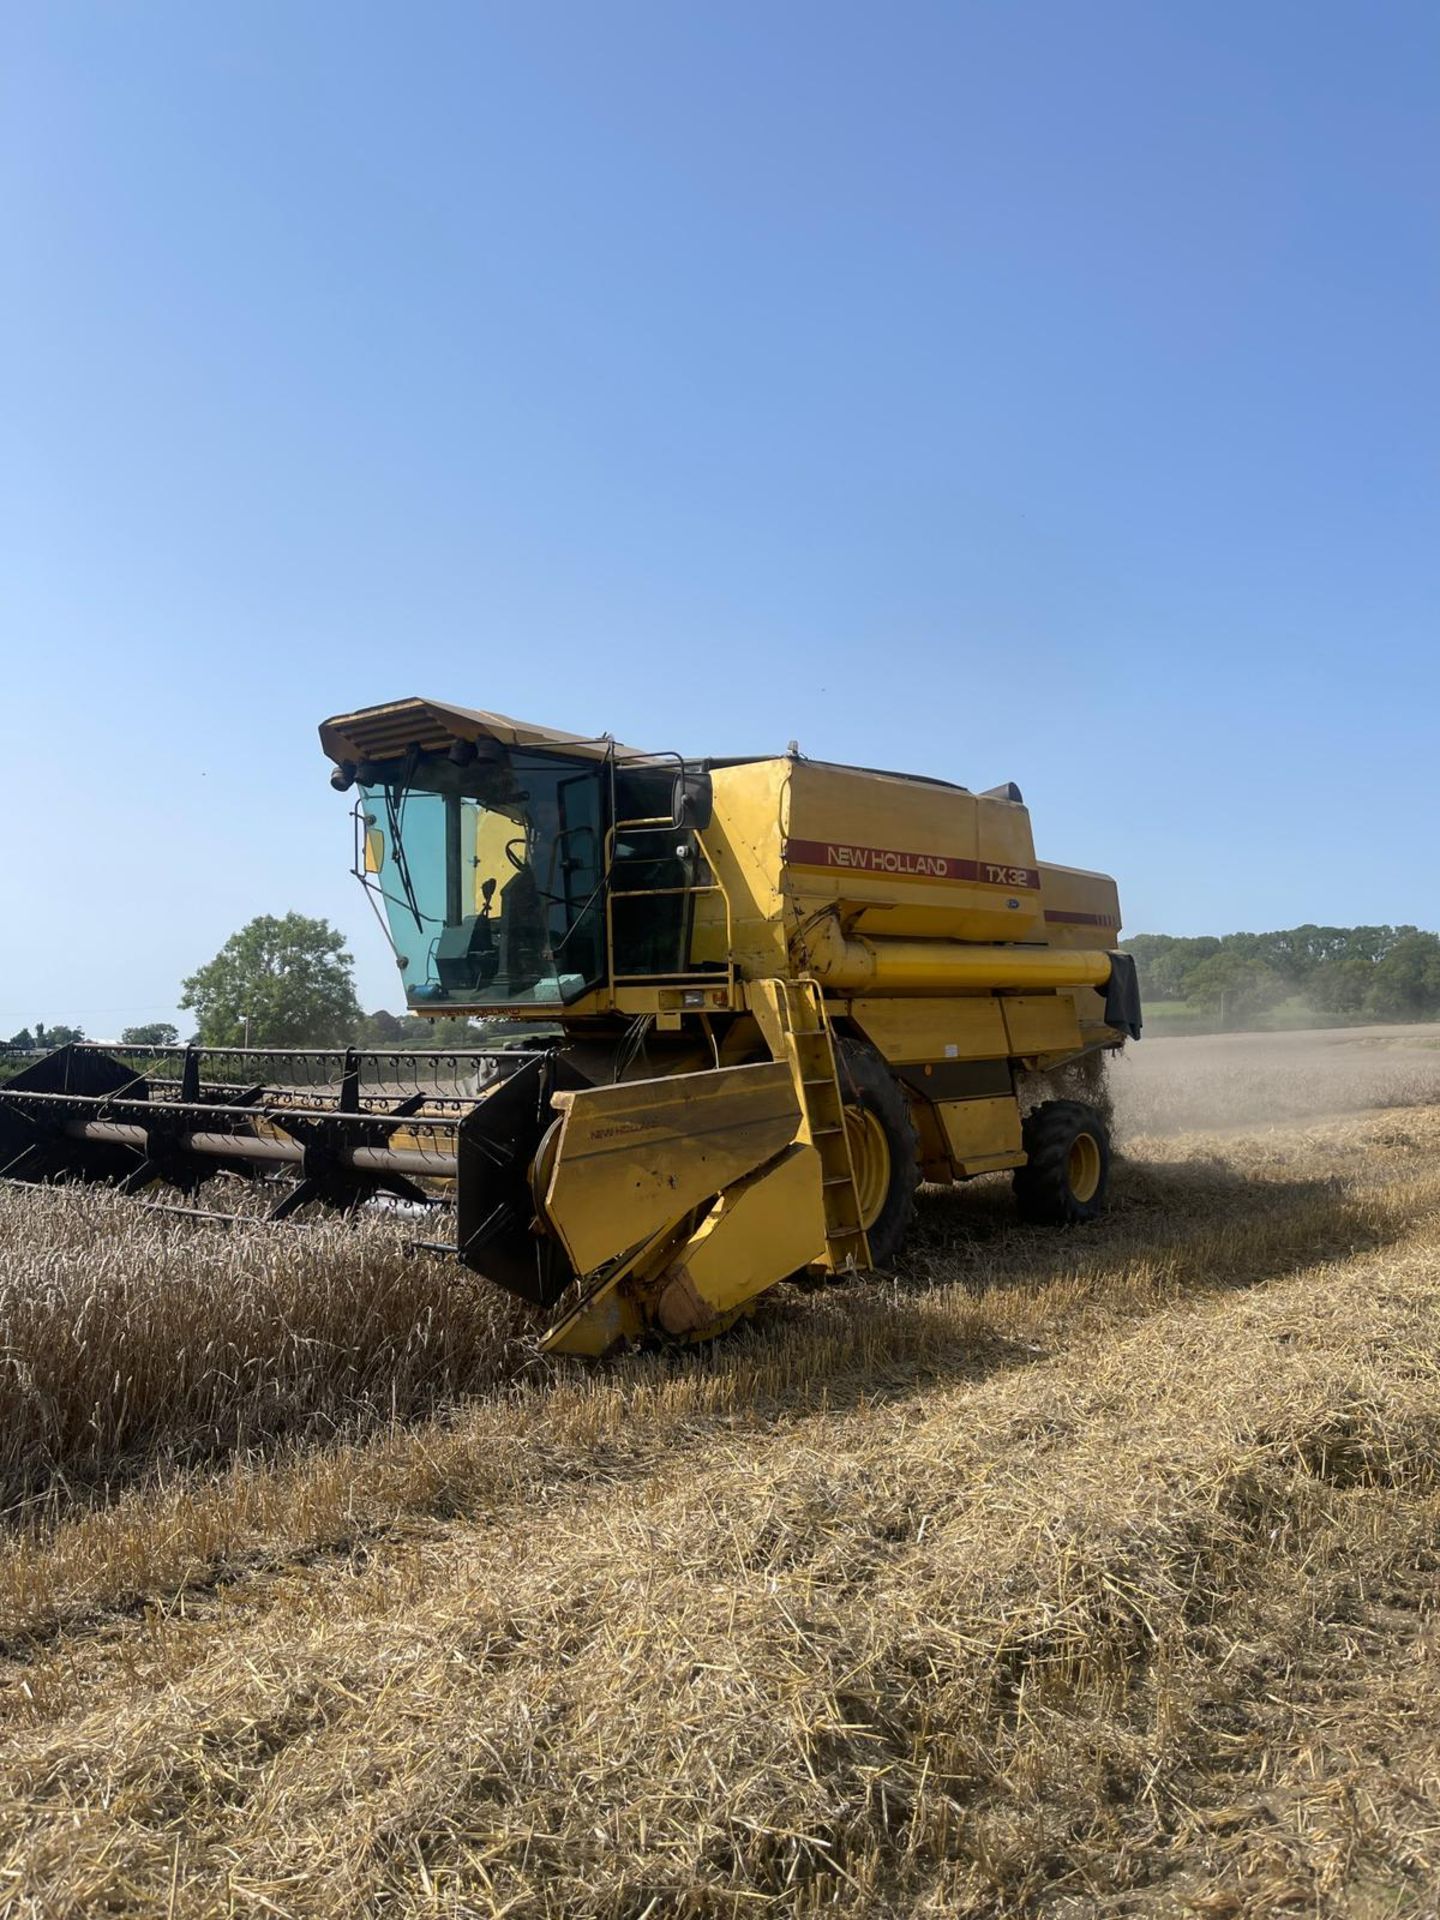 NEW HOLLAND TX32 COMBINE - Image 12 of 19